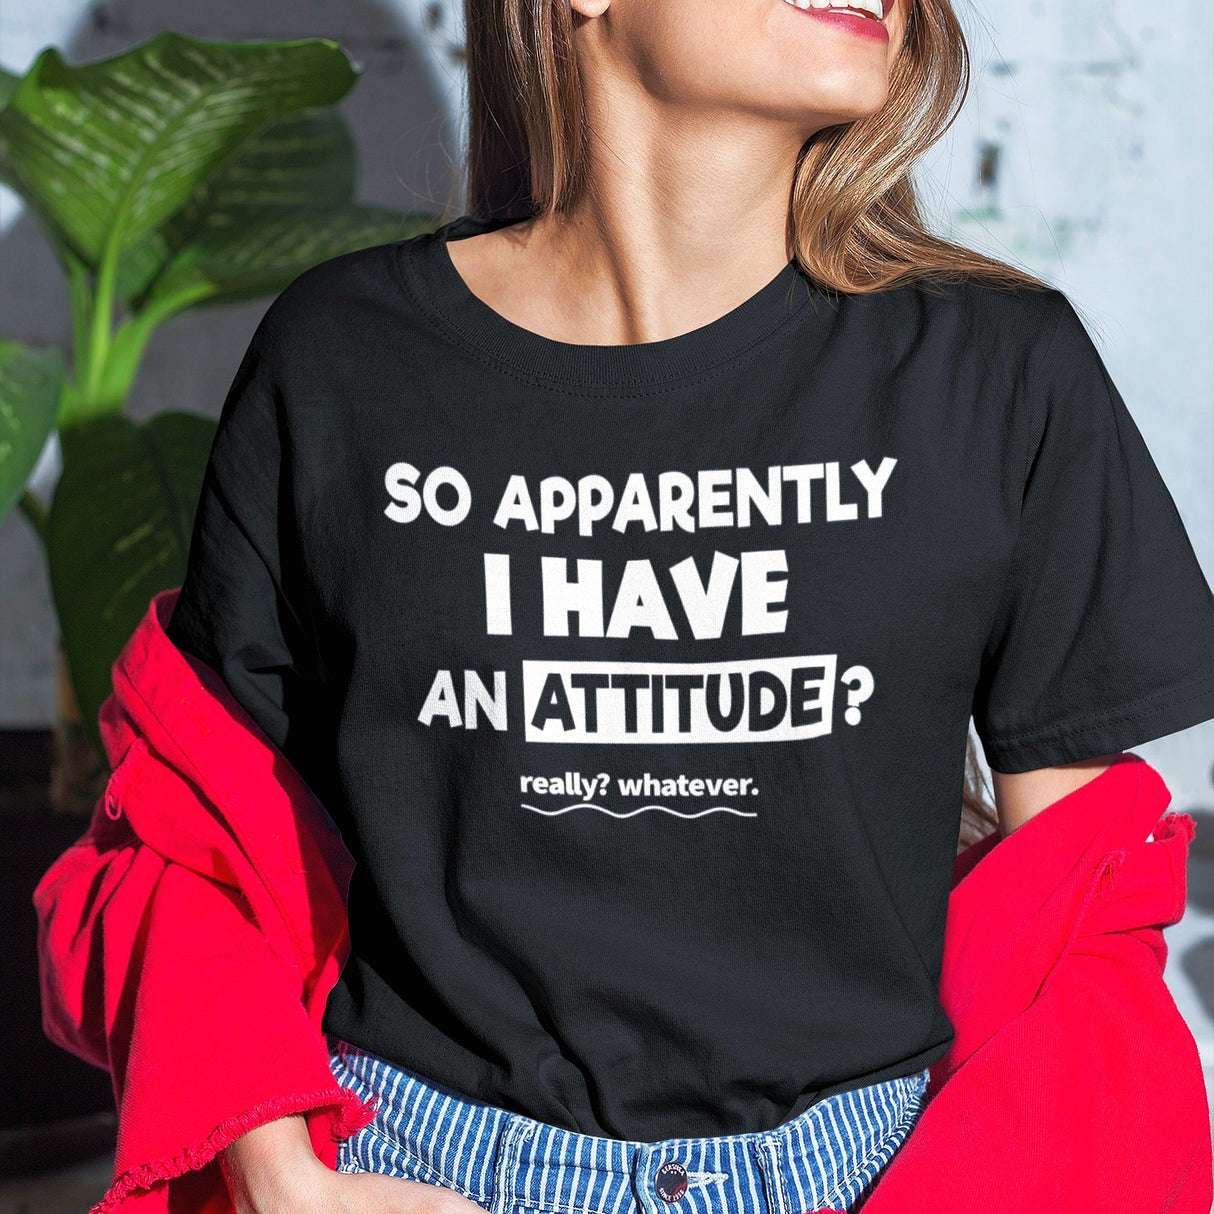 so-apparently-i-have-an-attitude-whatever-life-tee-funny-t-shirt-attitude-tee-casual-t-shirt-statement-tee#color_black